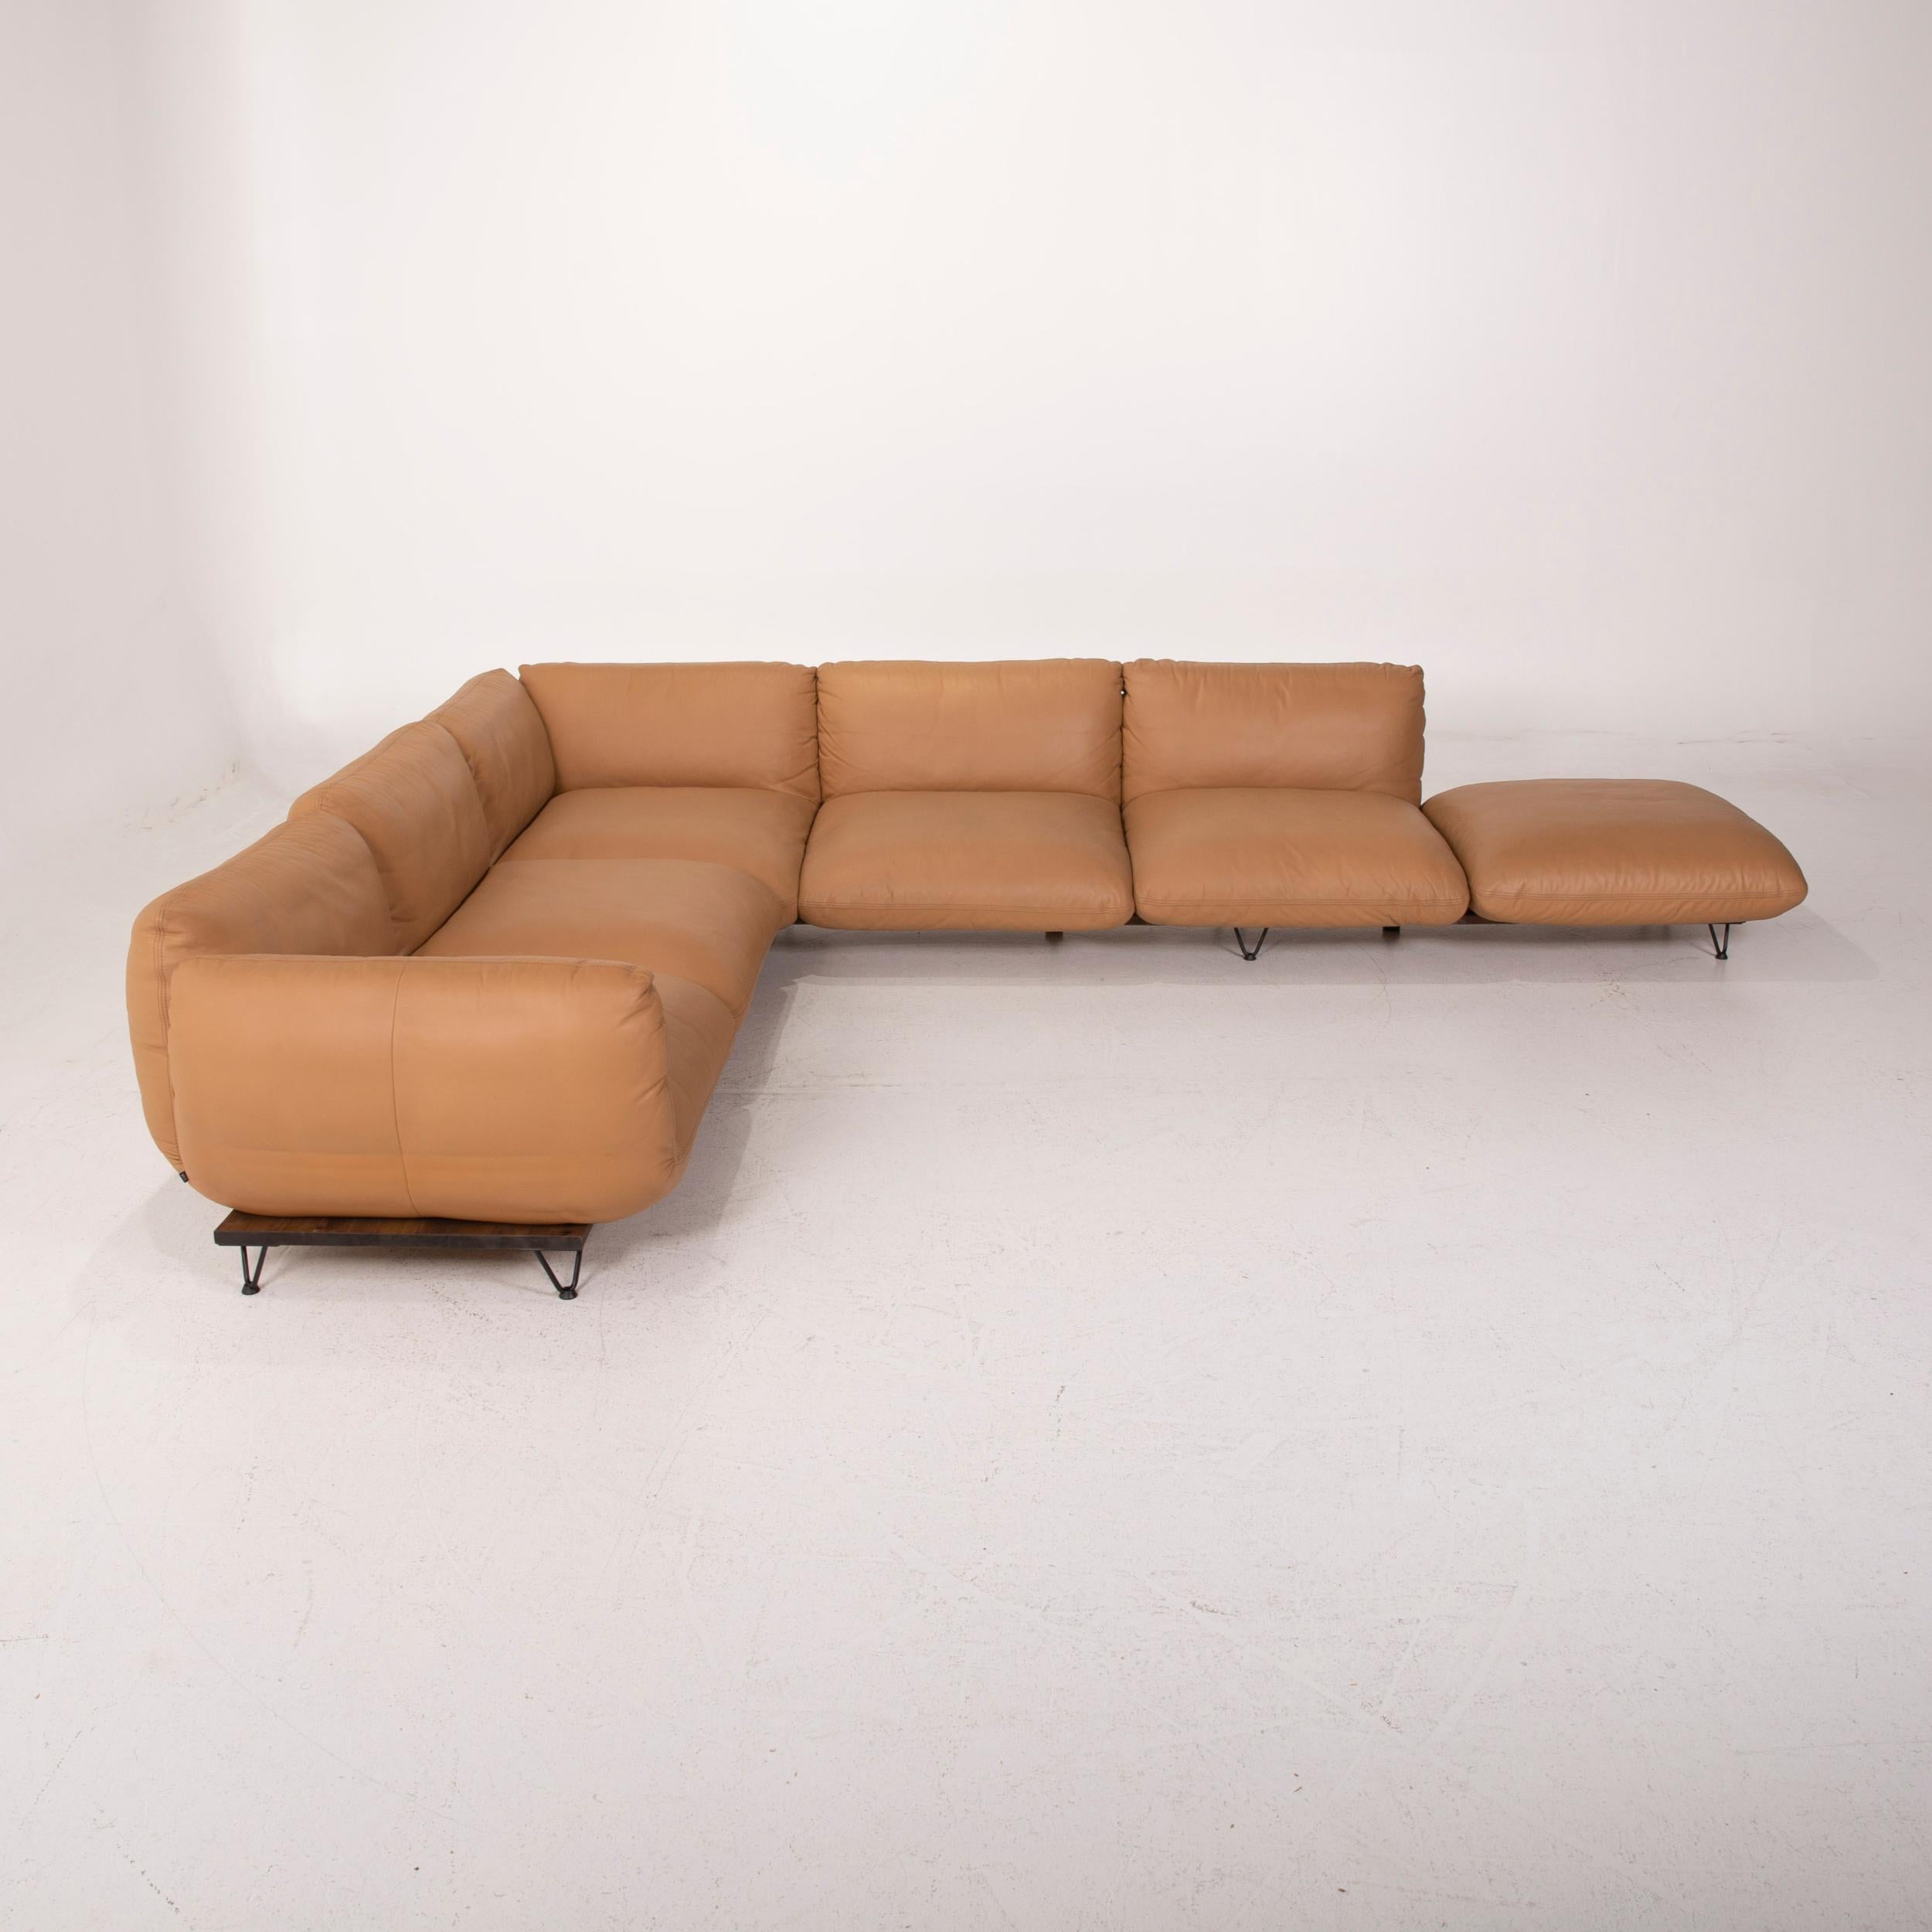 German Cor Jalis Leather Sofa Cognac Corner Sofa Substructure and Feet by Revive